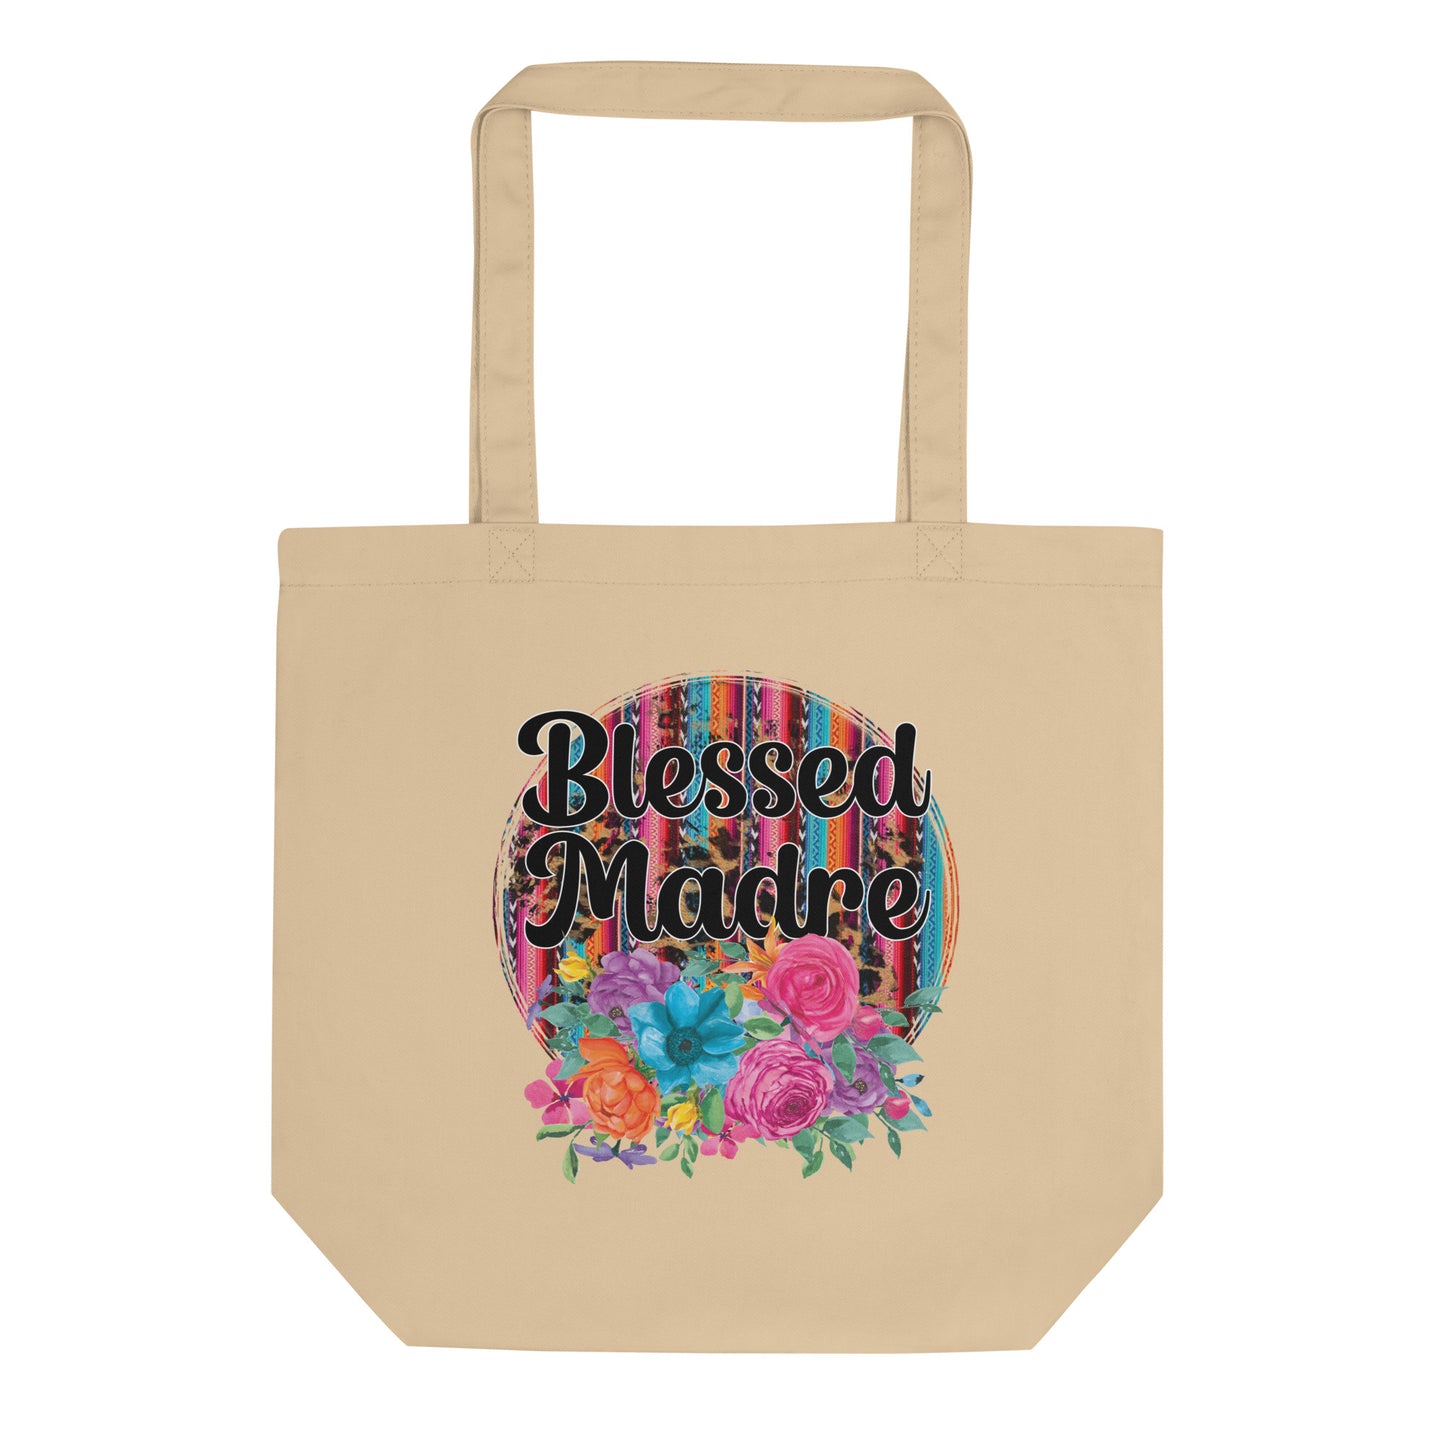 Blessed Madre Organic Tote Bag